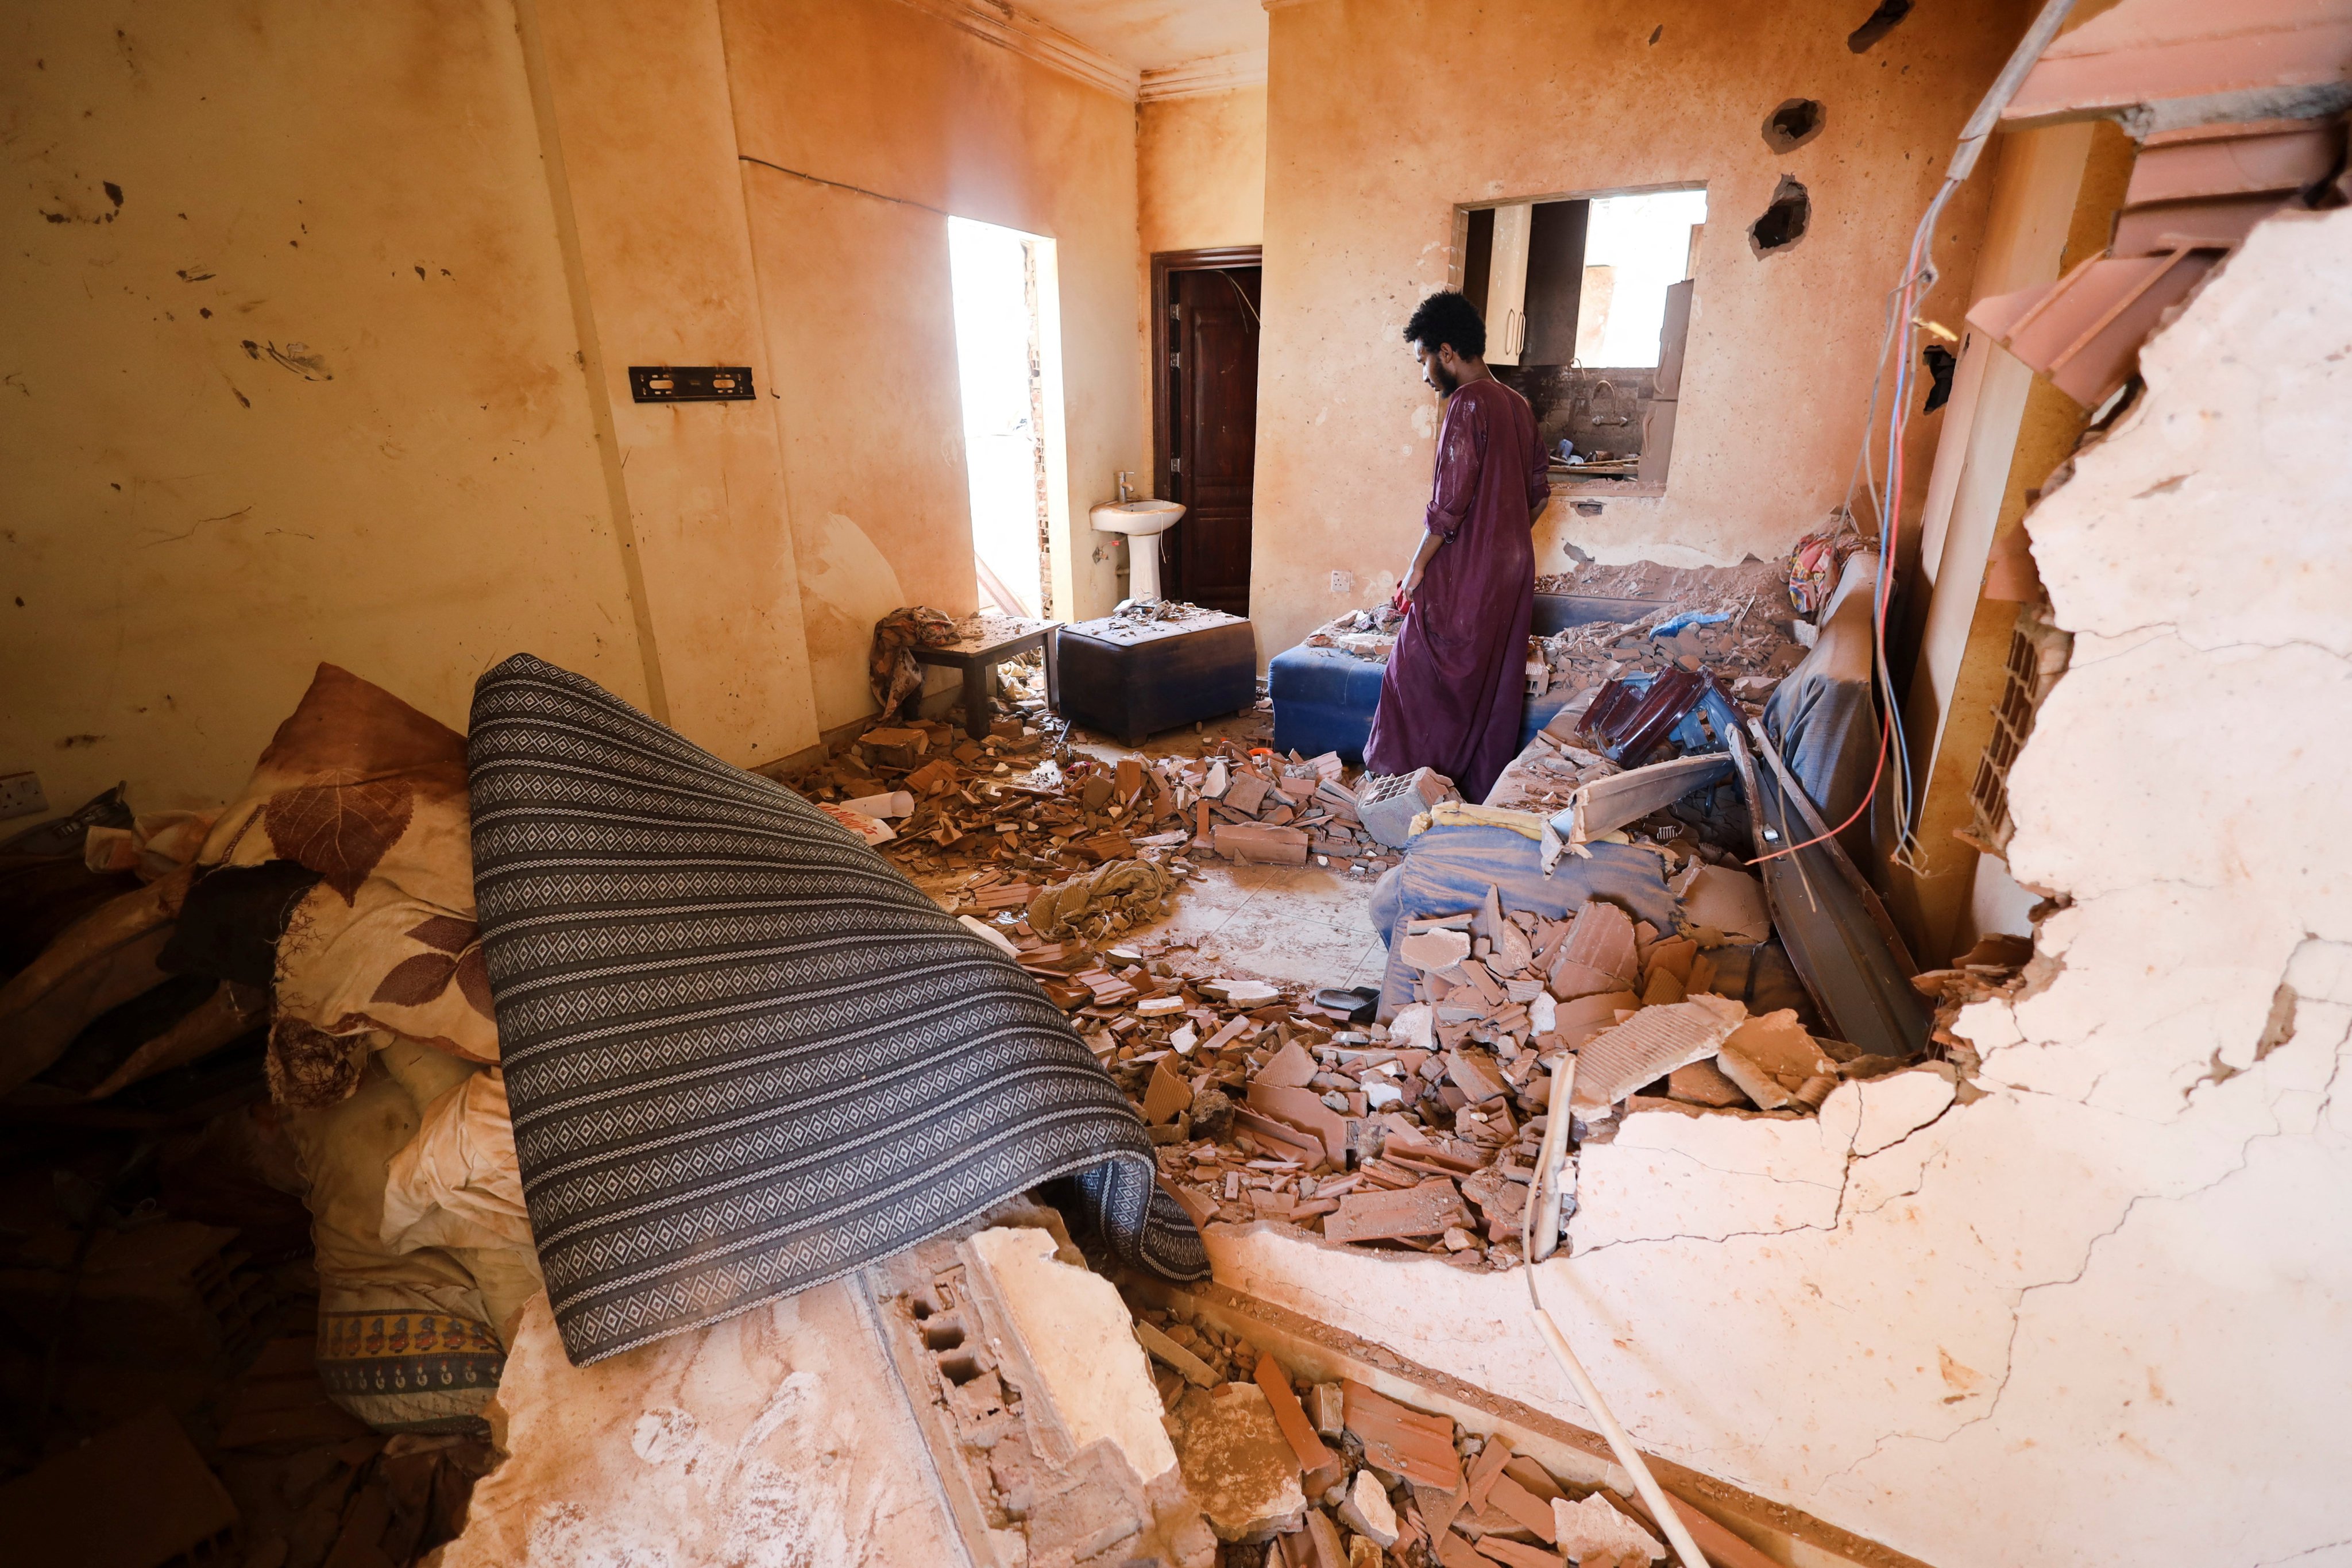 A man surveys the damage inside a Khartoum home damaged during clashes between the Sudan army and the paramilitary Rapid Support Forces. Photo: Reuters